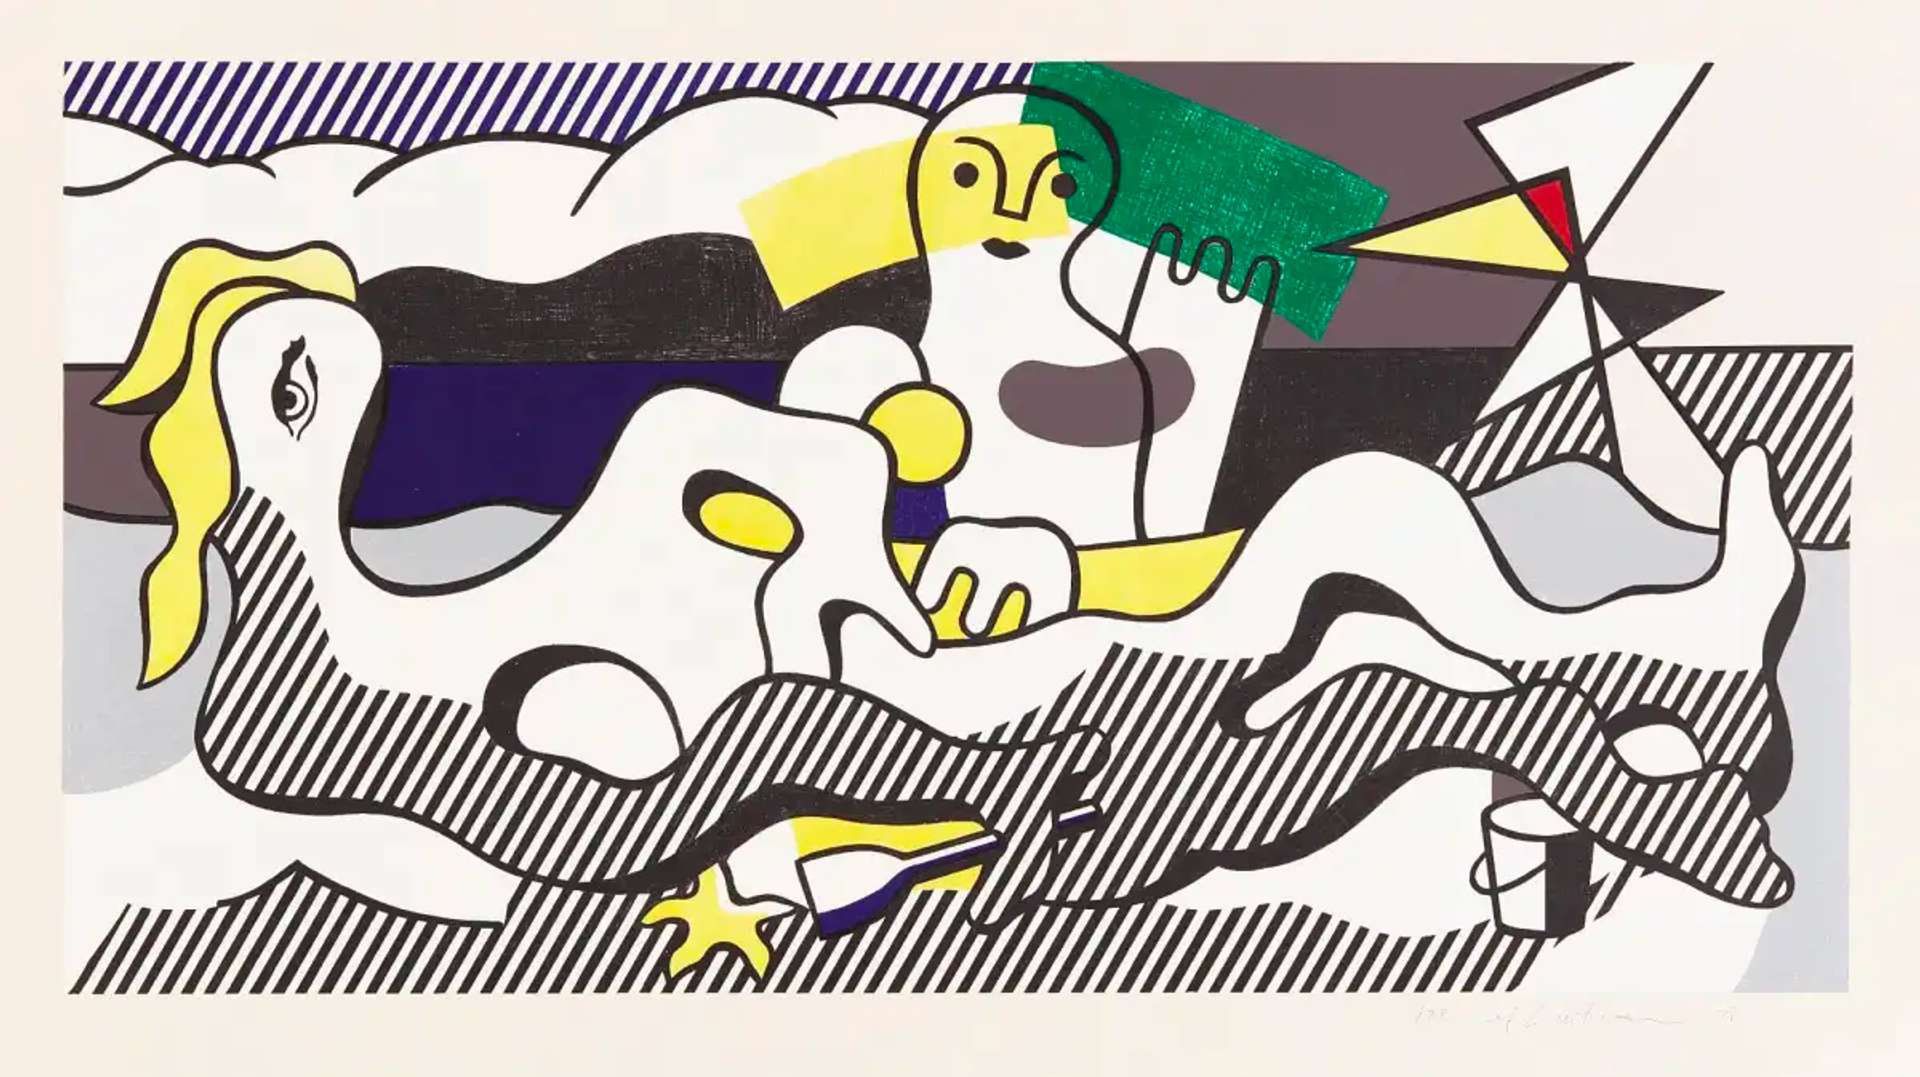 Two protagonists set amid minimalist hills and levitating futurist shapes. One is an amorphous sunbathing woman stretched across the canvas. She is composed entirely of graphic red stripes and bright yellow tufts of hair. Her companion’s shape is fixed in the background, reminiscent of a cubist ceramic, greeting the beholder with a wave.